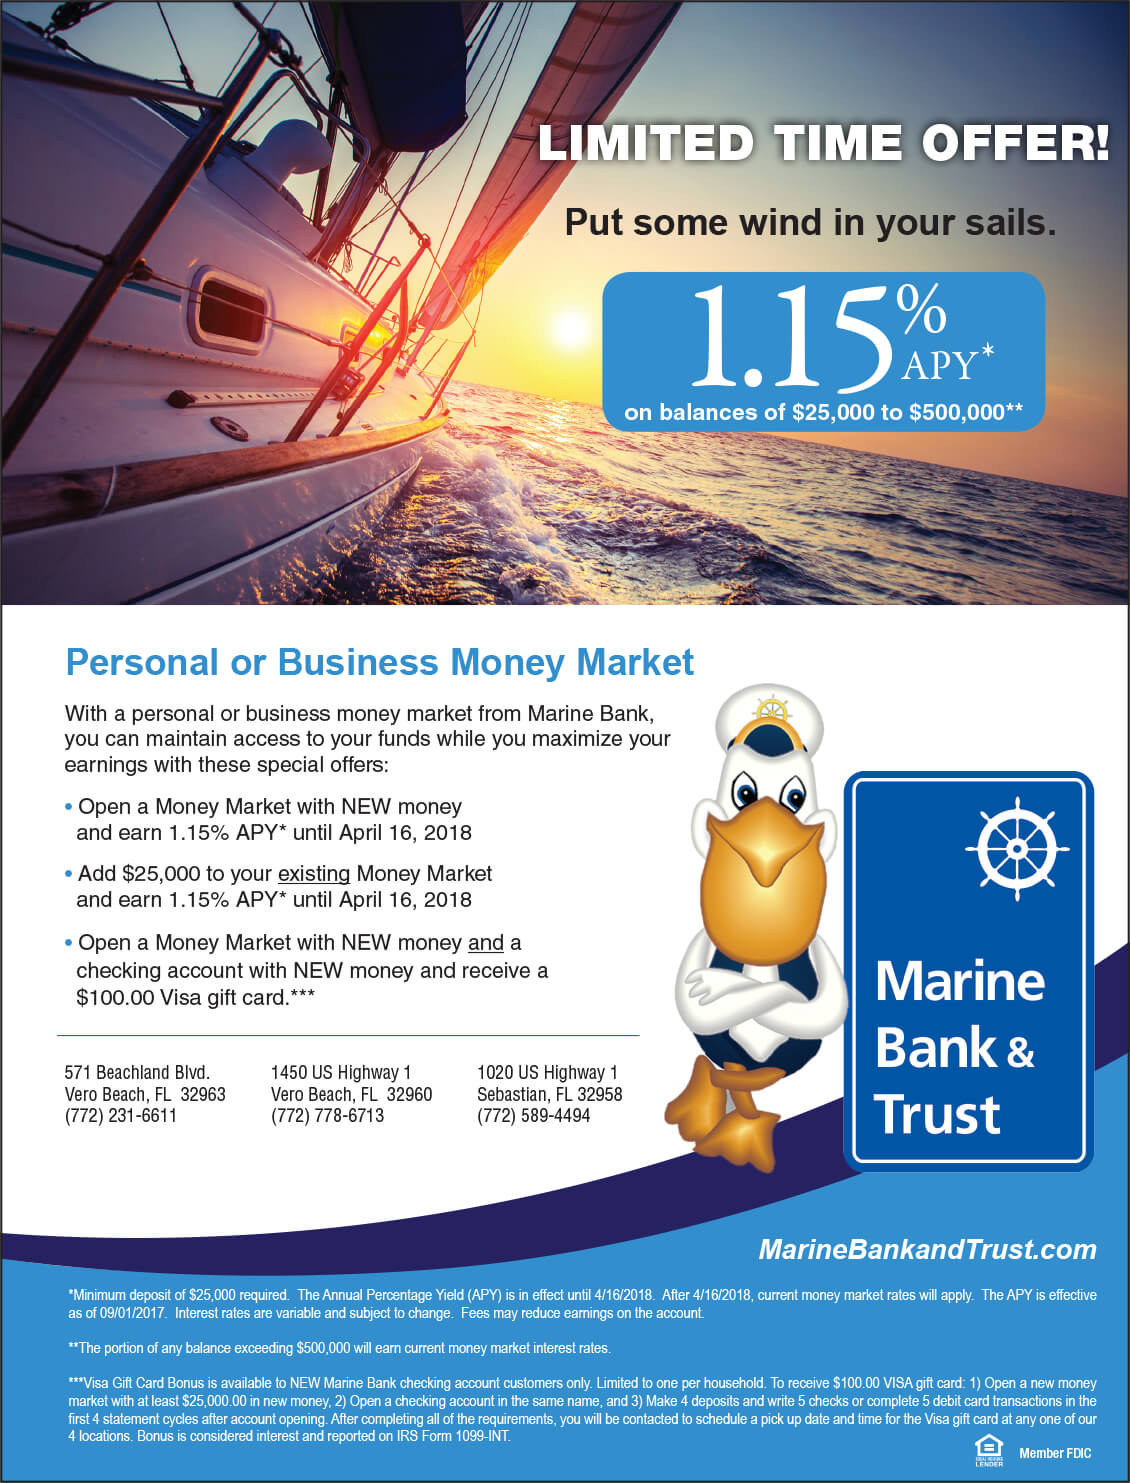 Limited Time Offer!

1.15% APY* on balances of $25,000 to $500,000**
Terms and Conditions Apply - Call for Details

Personal Or Business Money Market
With a personal or business money market from Marine Bank,
you can maintain access to your funds while you maximize your earnings with these special offers:

• Open a Money Market with NEW money
  and earn 1.15% APY* until April 16, 2018

• Add $25,000 to your existing Money Market
  and earn 1.15% APY* until April 16, 2018

• Open a Money Market with NEW money and a 
  checking account with NEW money and receive a
  $100.00 Visa gift card.***
 
 


